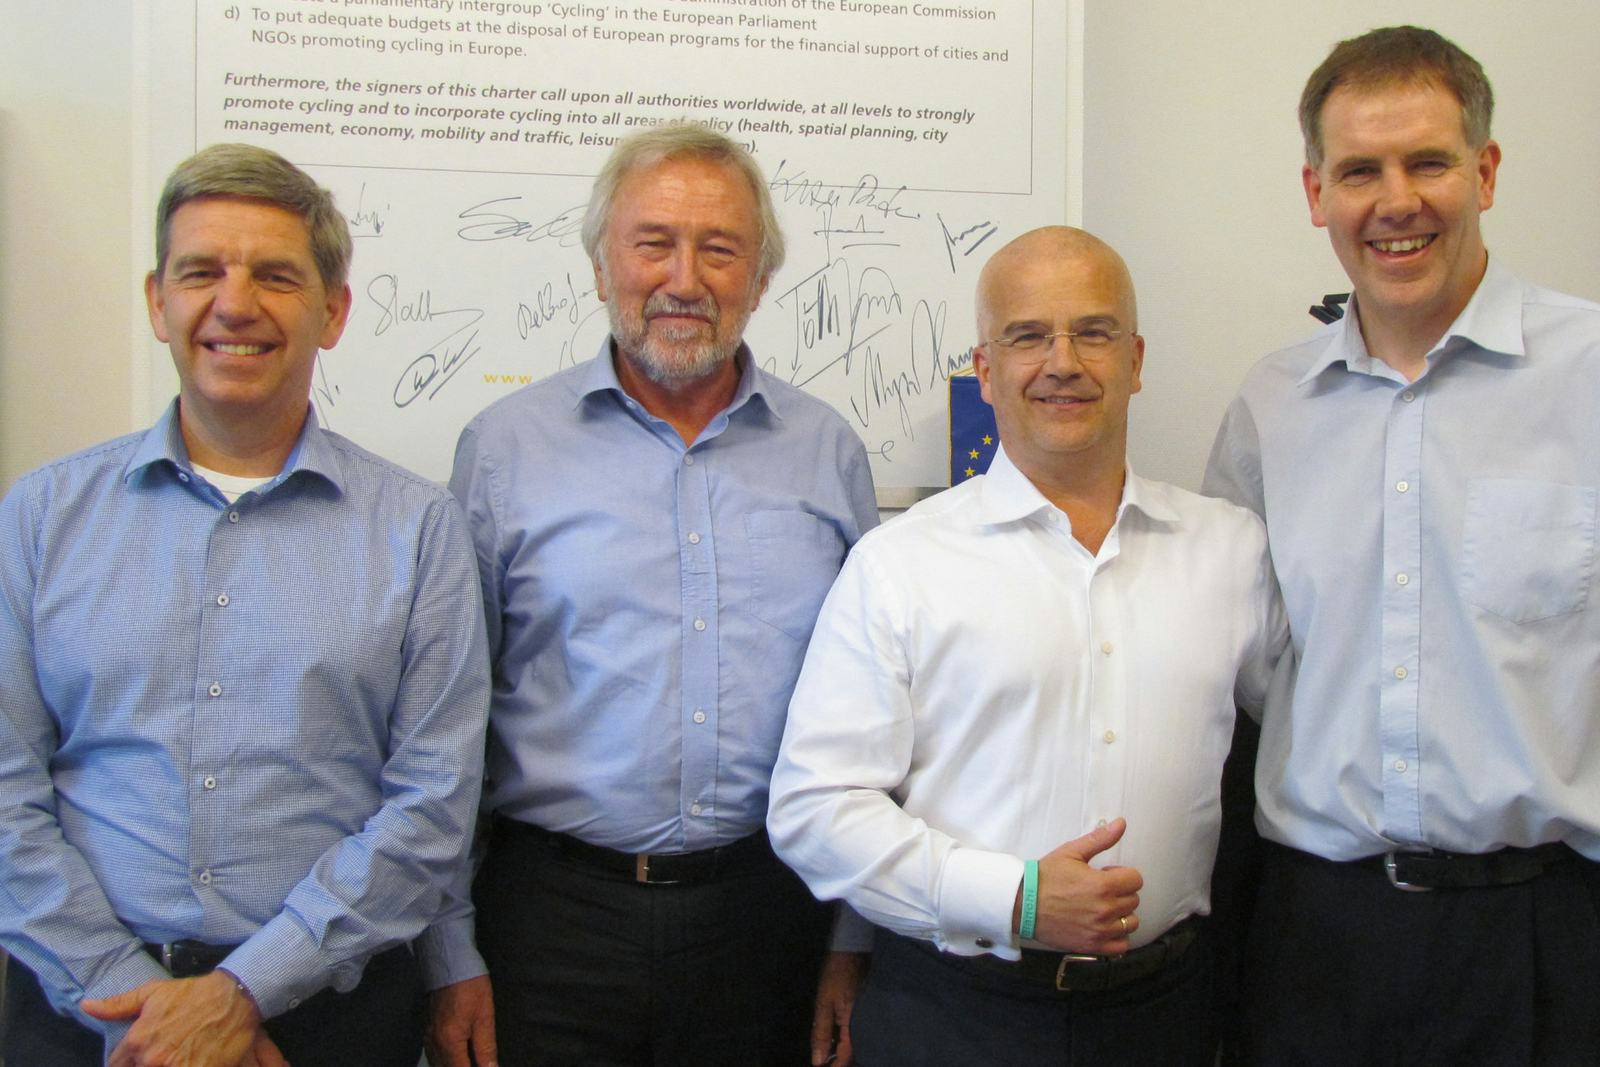 The Cycling Industry Club Advisory Board members appointed Toni Grimaldi (second from right) Chairman and Raymond Gense (left) as Vice Chairman. They are accompanies here by Manfred Neun (ECF President) and ECF’s Development Director Kevin Mayne who manages the Club activities. – Photo Bike Europe